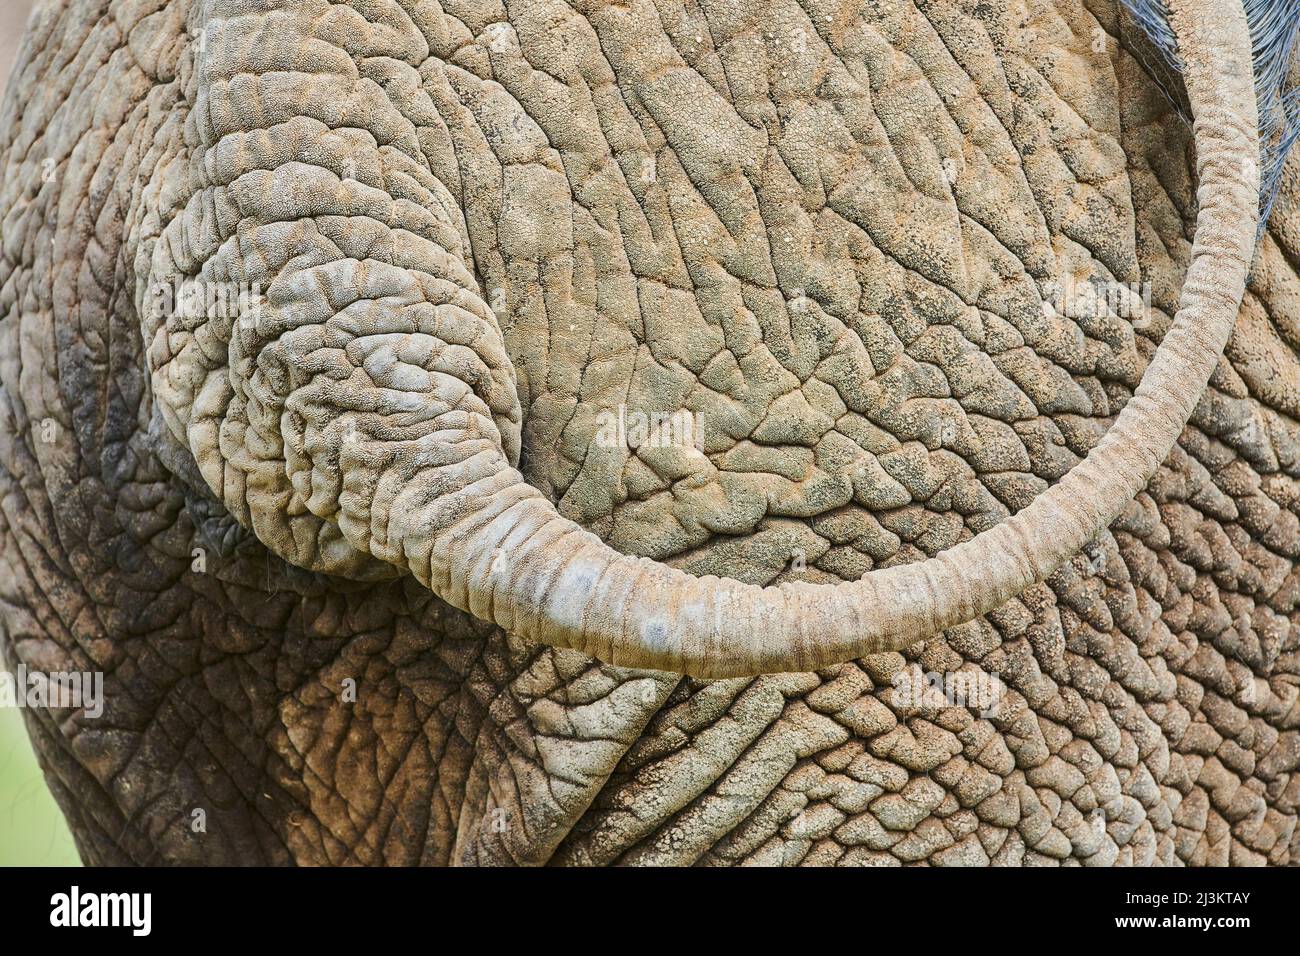 Close-up detail of the wrinkled skin, rear and tail of an African bush elephant (Loxodonta africana), captive; Czech Republic Stock Photo